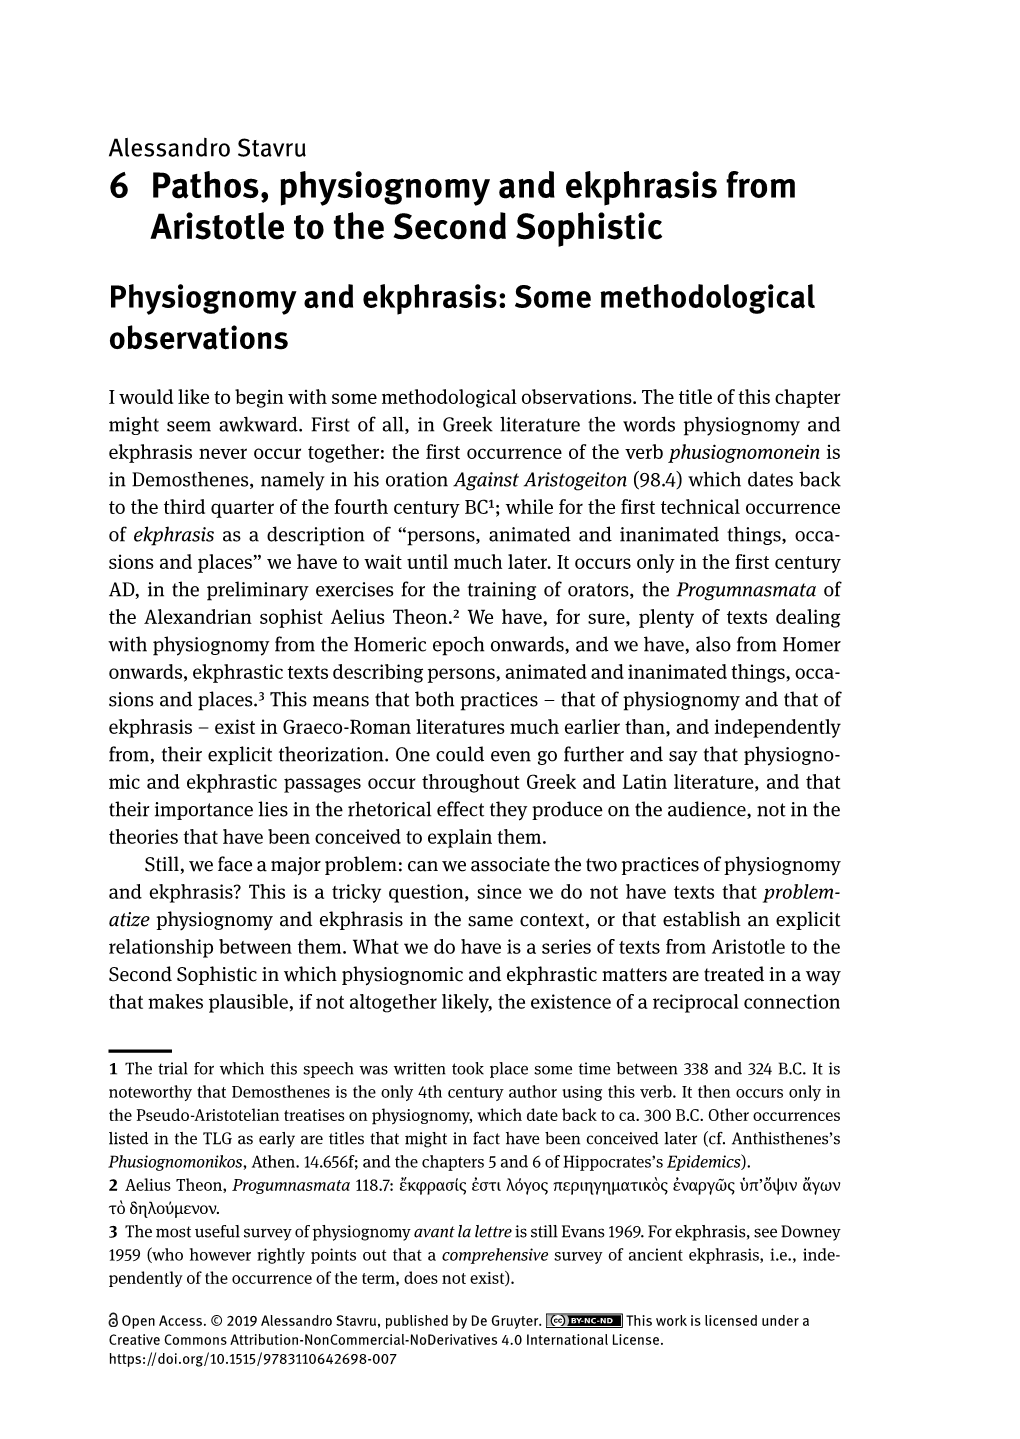 6 Pathos, Physiognomy and Ekphrasis from Aristotle to the Second Sophistic